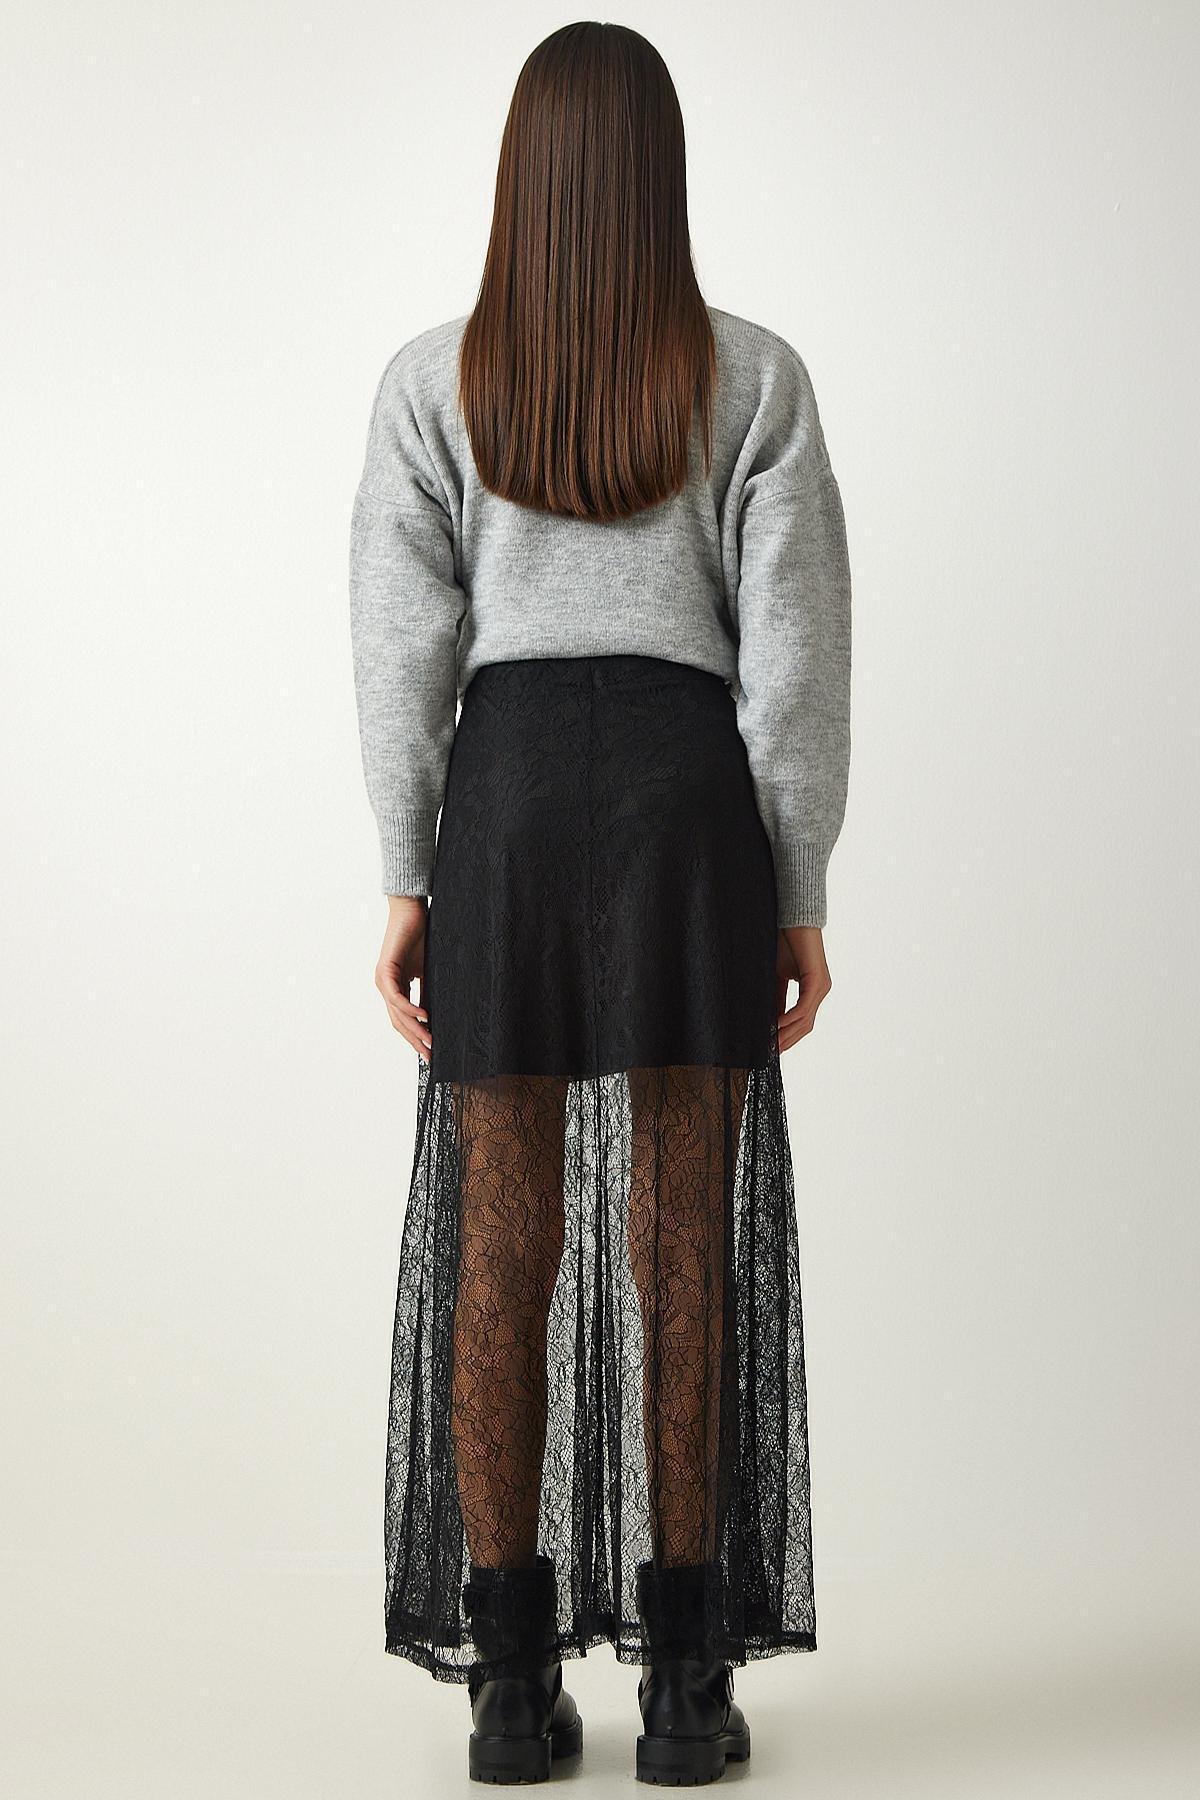 Happiness Istanbul - Black Laced Long Skirt